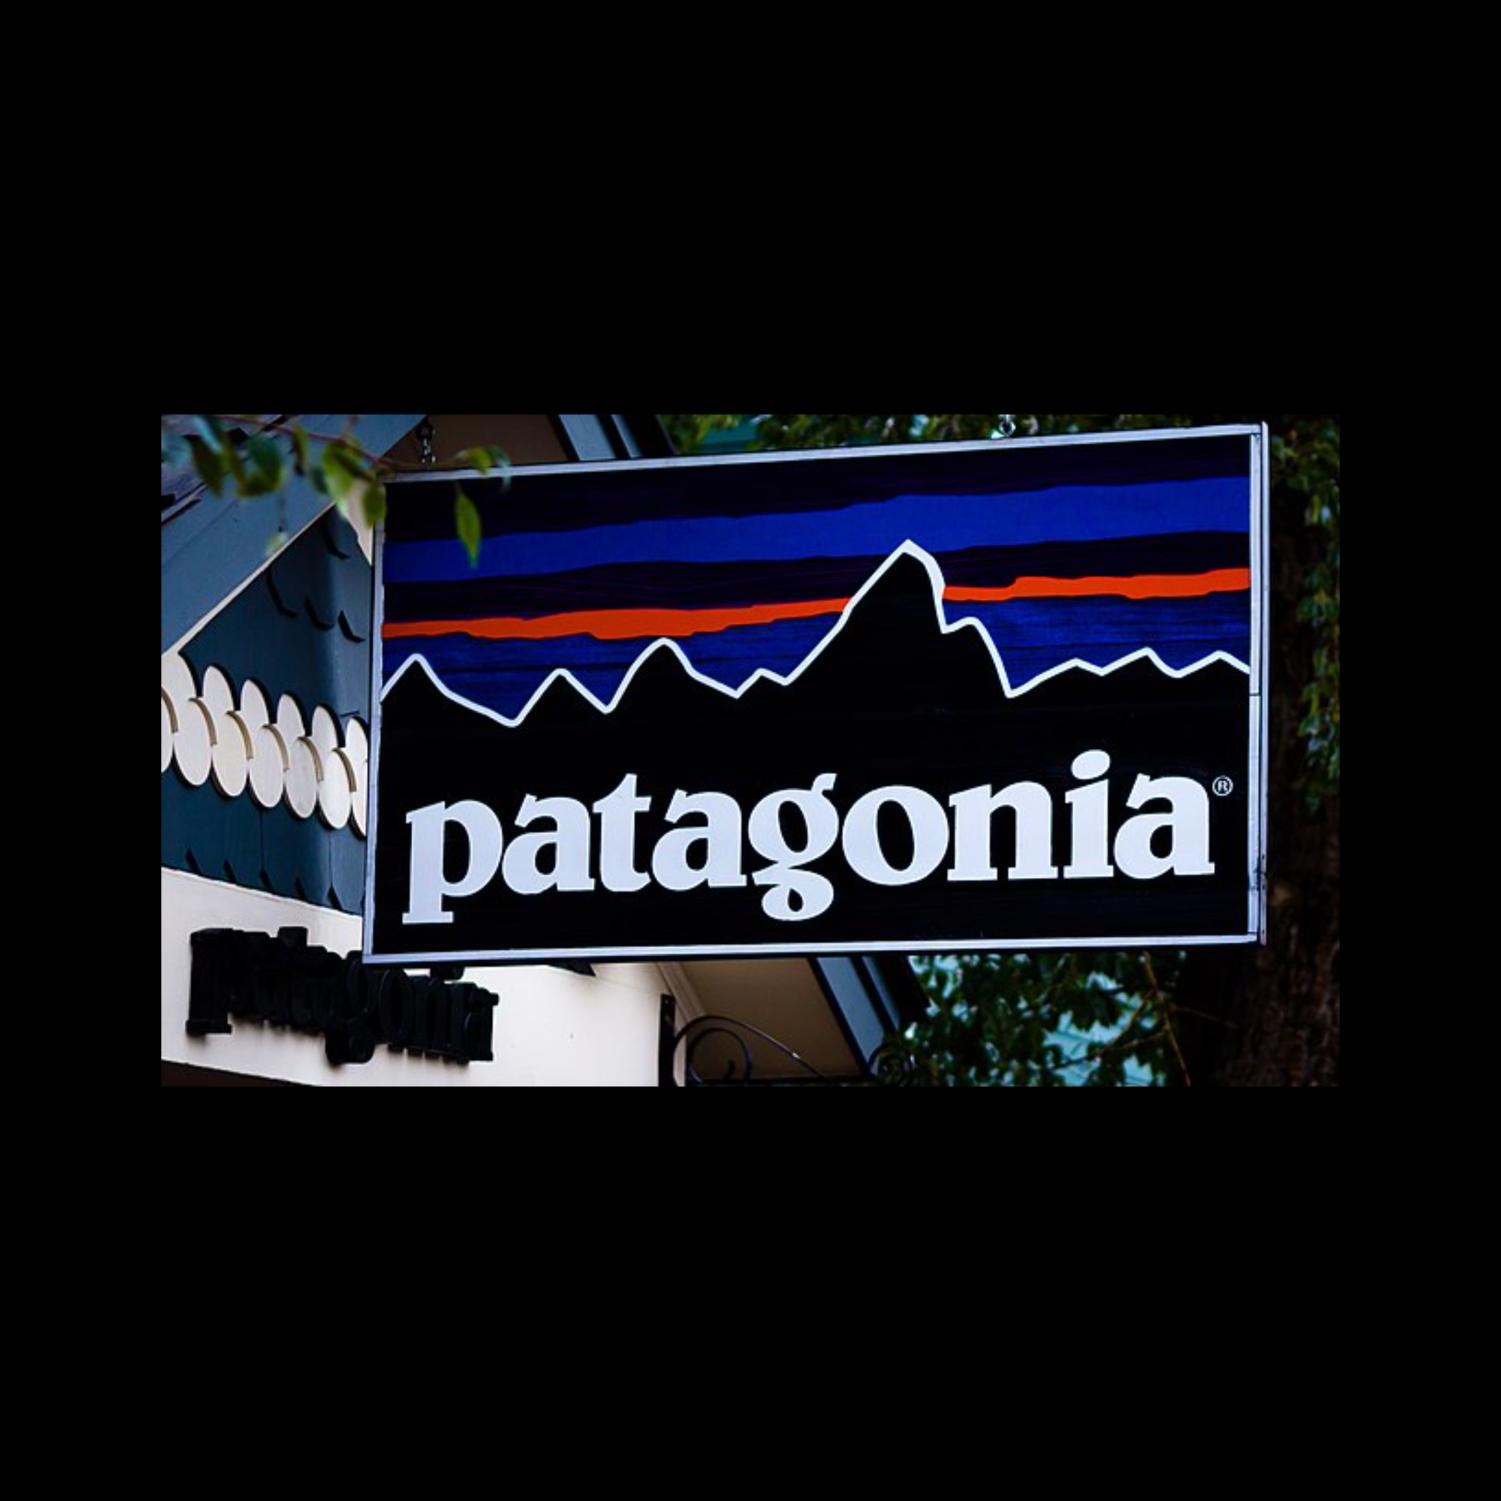 Patagonia now has one Shareholder: The Earth – Spartan Shield